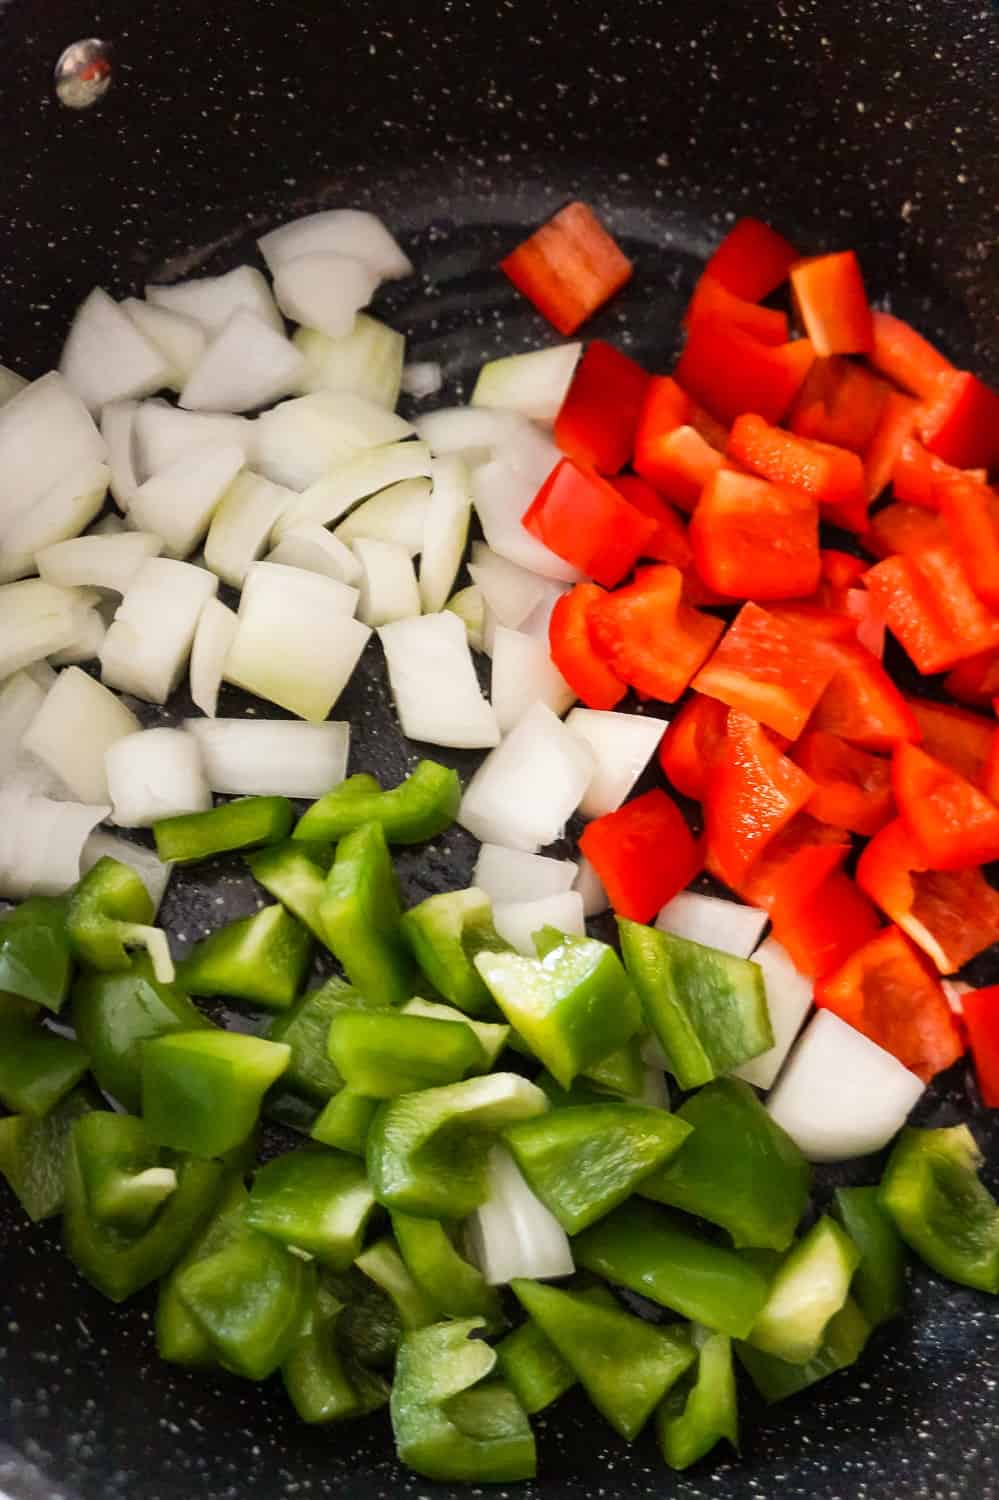 diced onion, diced green peppers and diced red peppers